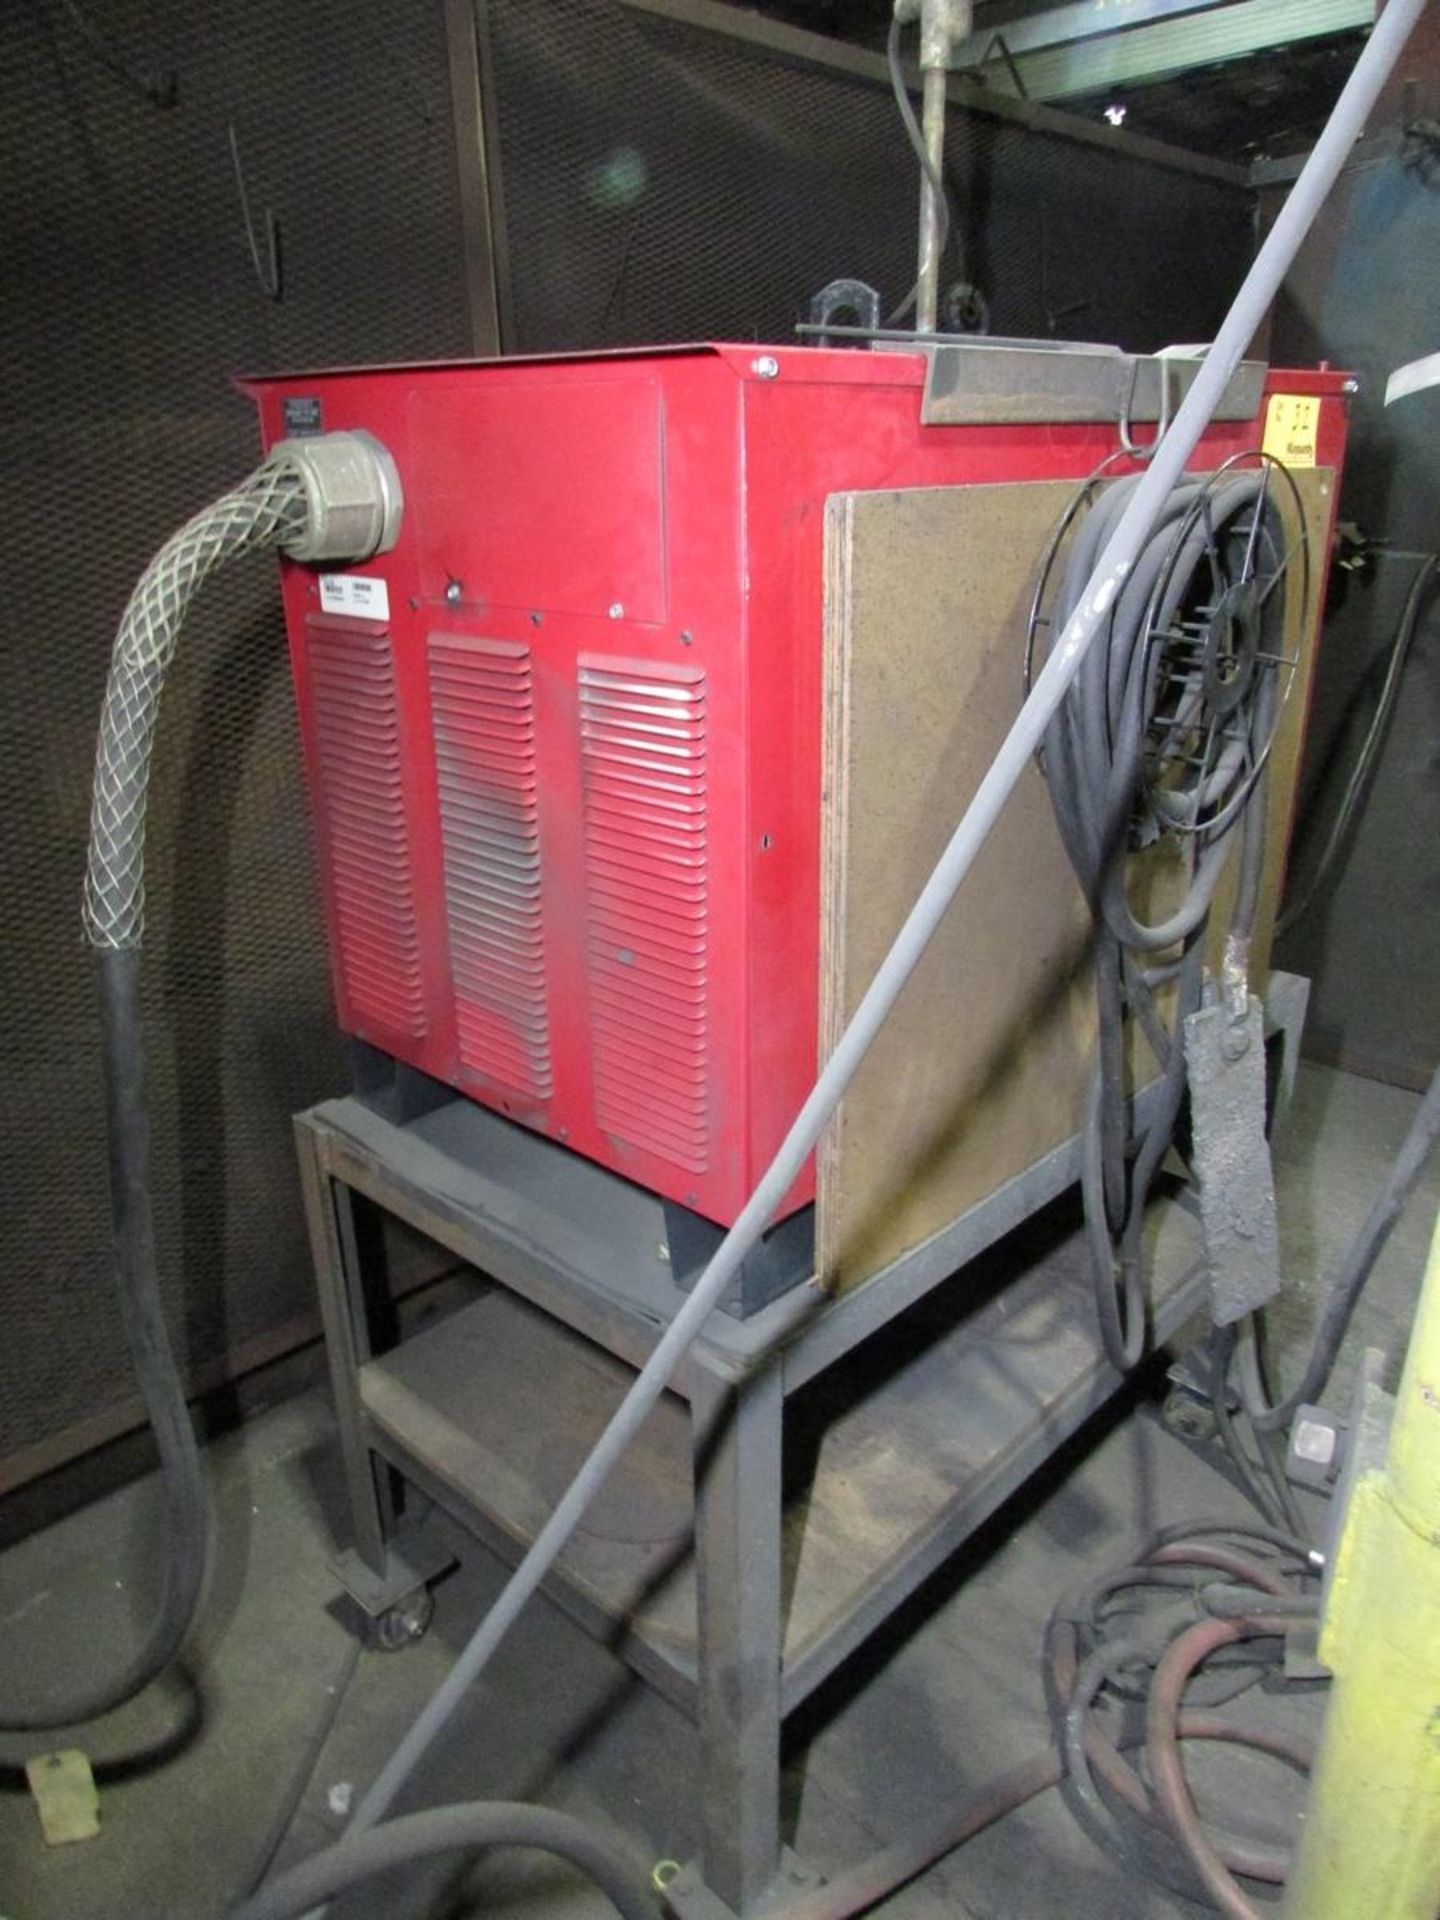 Lincoln Electric Idealarc DC1000 Welding Power Source w/ Welding Boom - Image 5 of 11